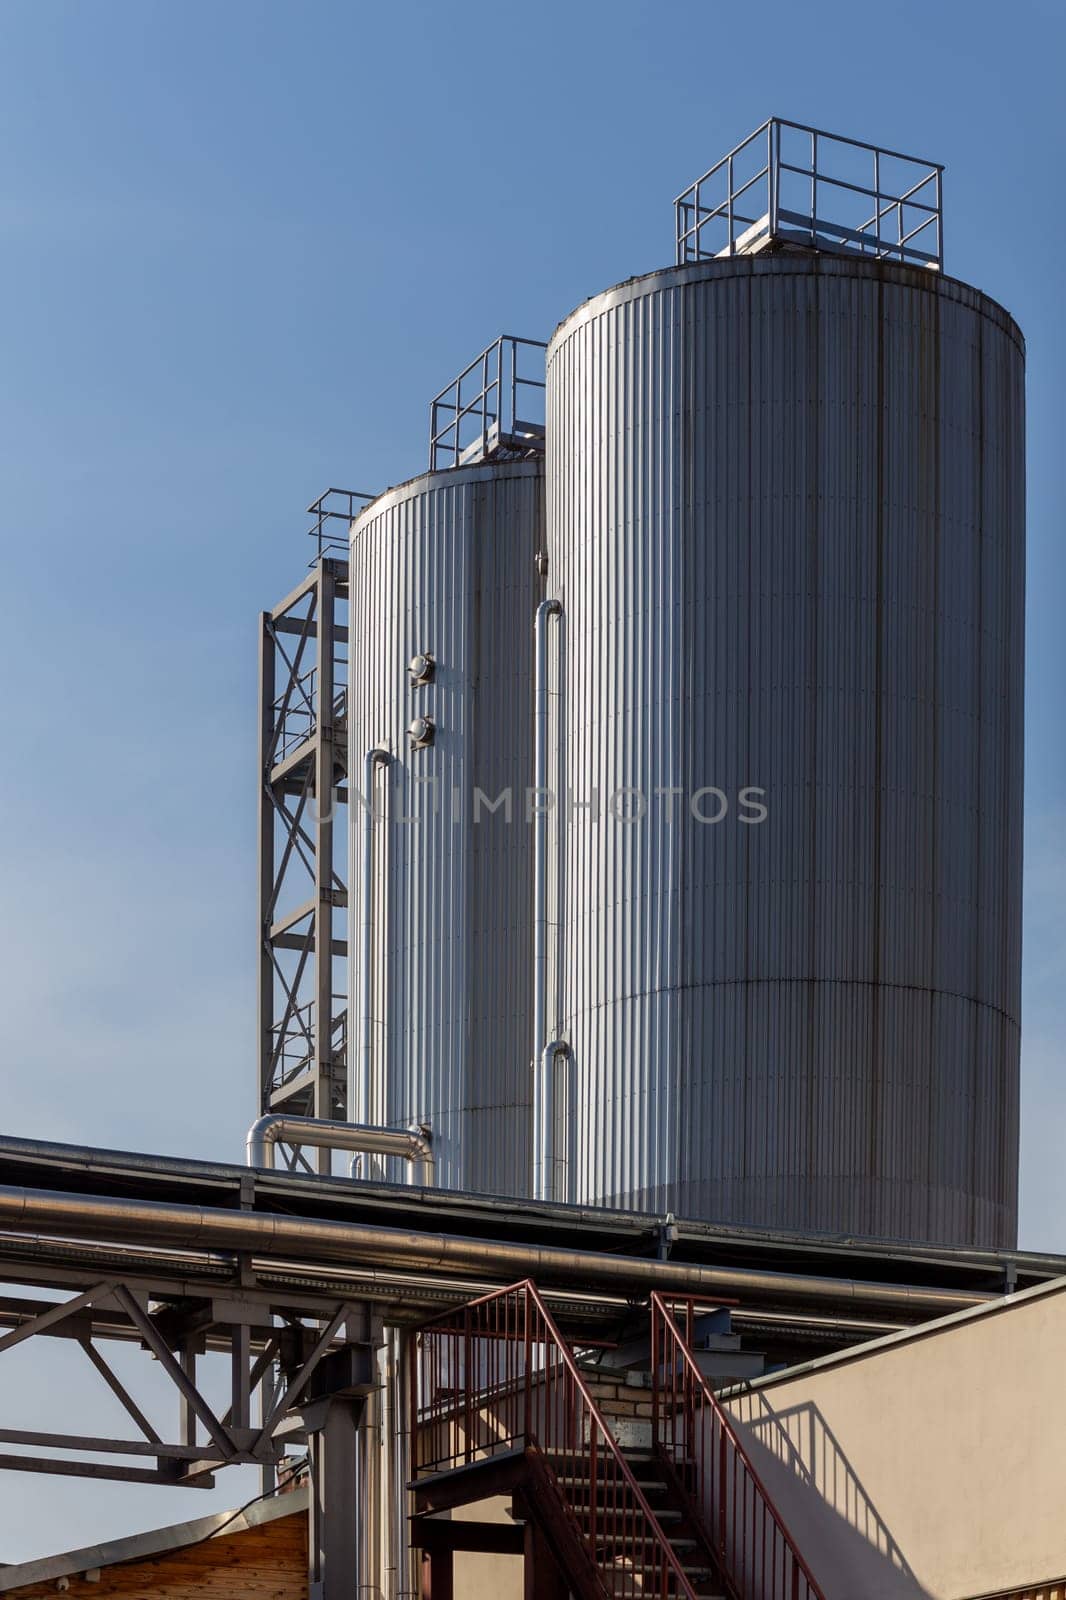 Brewery silos or tanks typically use for storing barley or fermented beer. by BY-_-BY